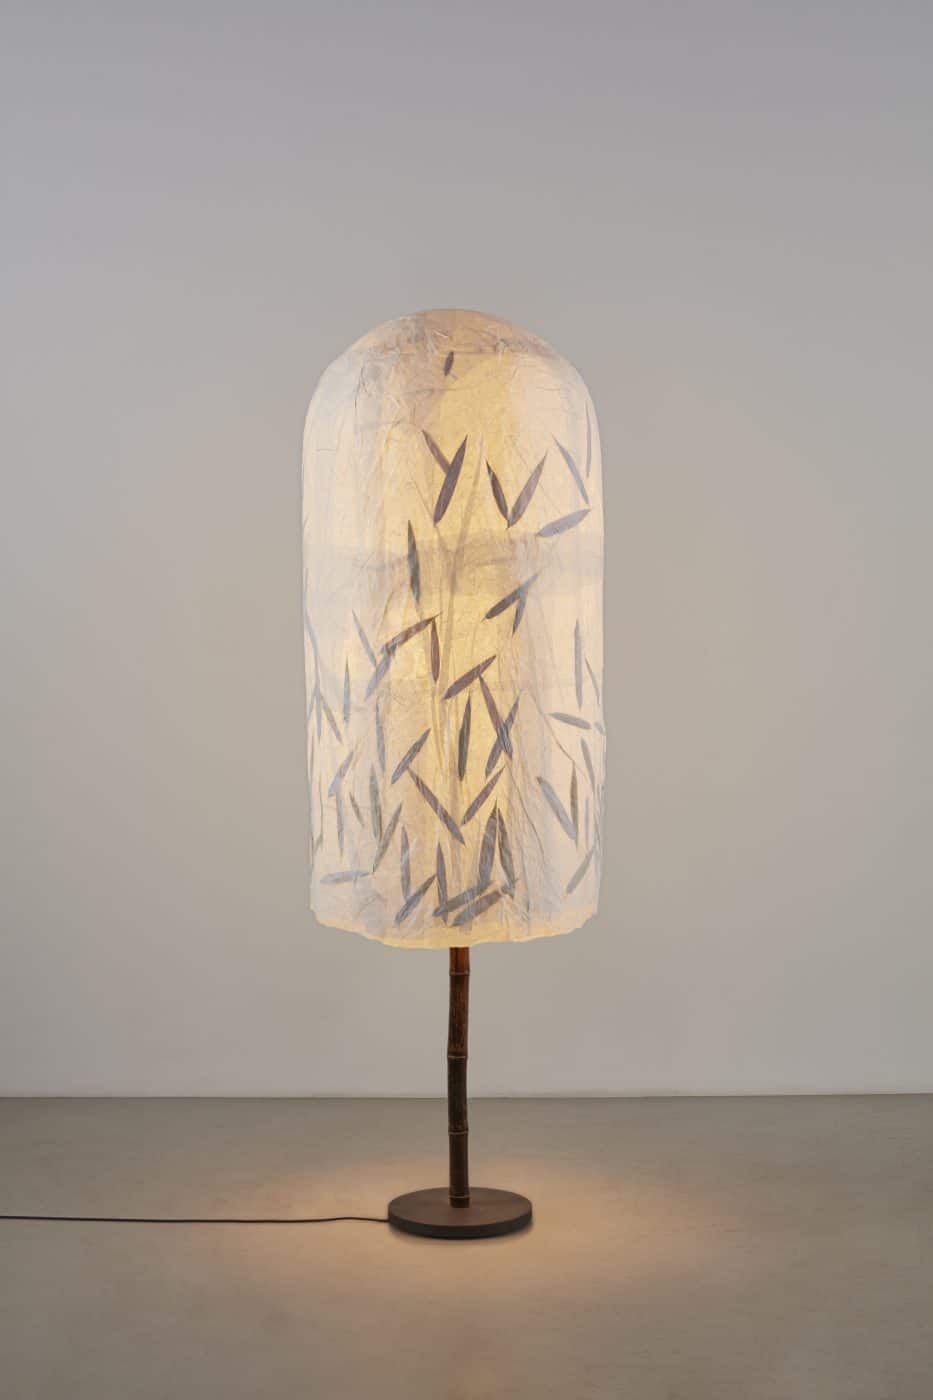 A floor lamp by Andrea Branzi with a tall, domed shade made of rice paper with embedded bamboo leaves